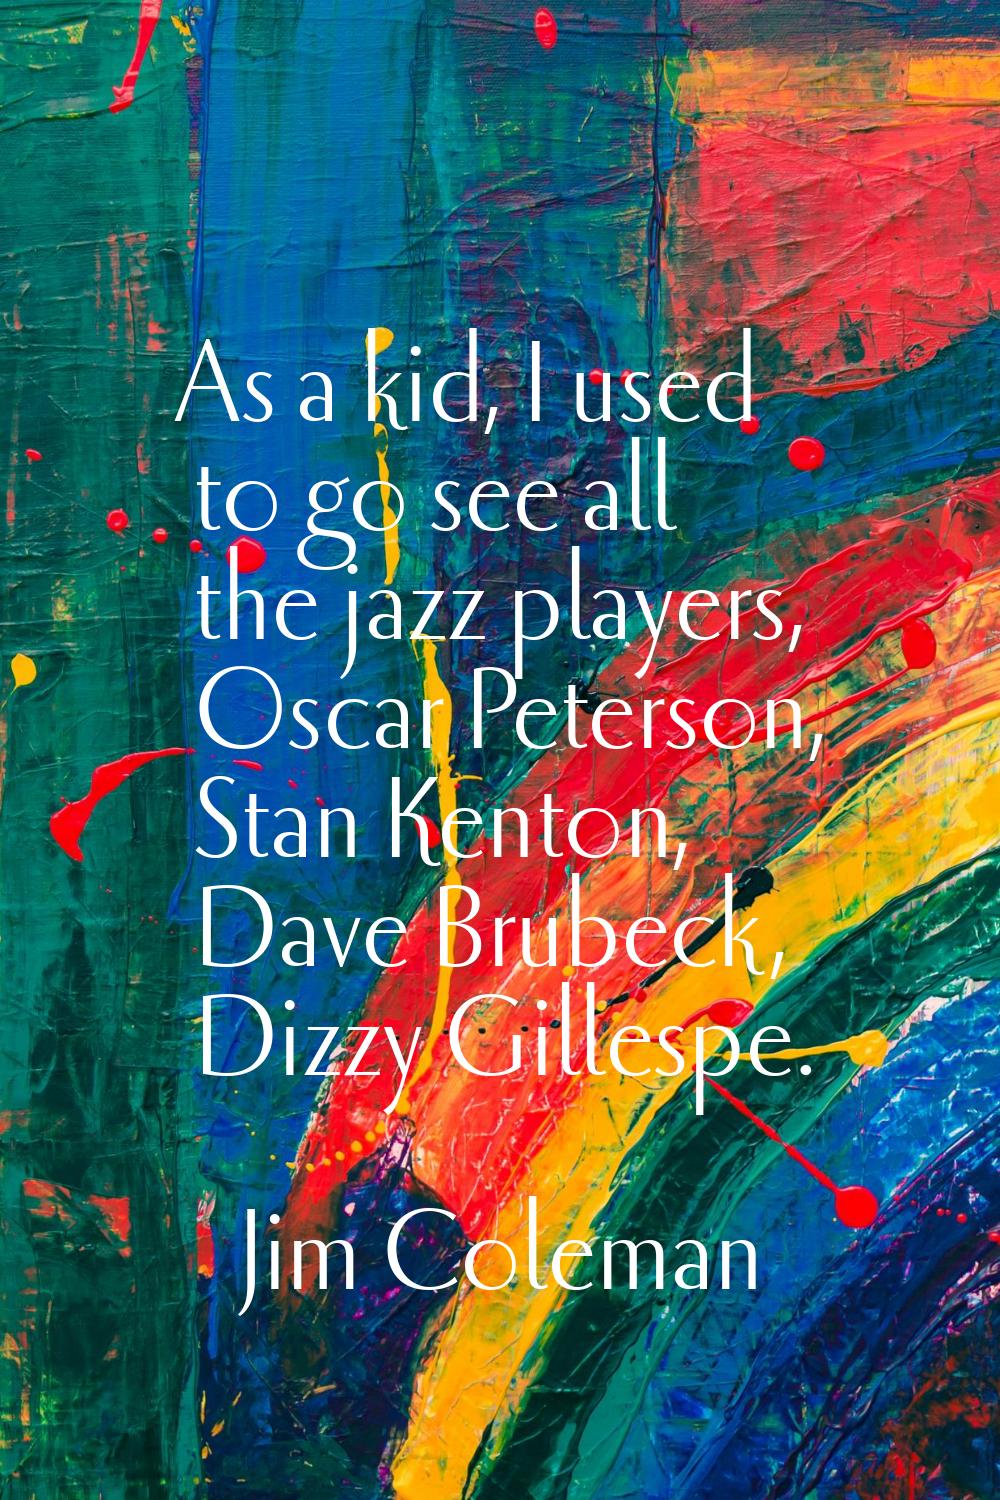 As a kid, I used to go see all the jazz players, Oscar Peterson, Stan Kenton, Dave Brubeck, Dizzy G